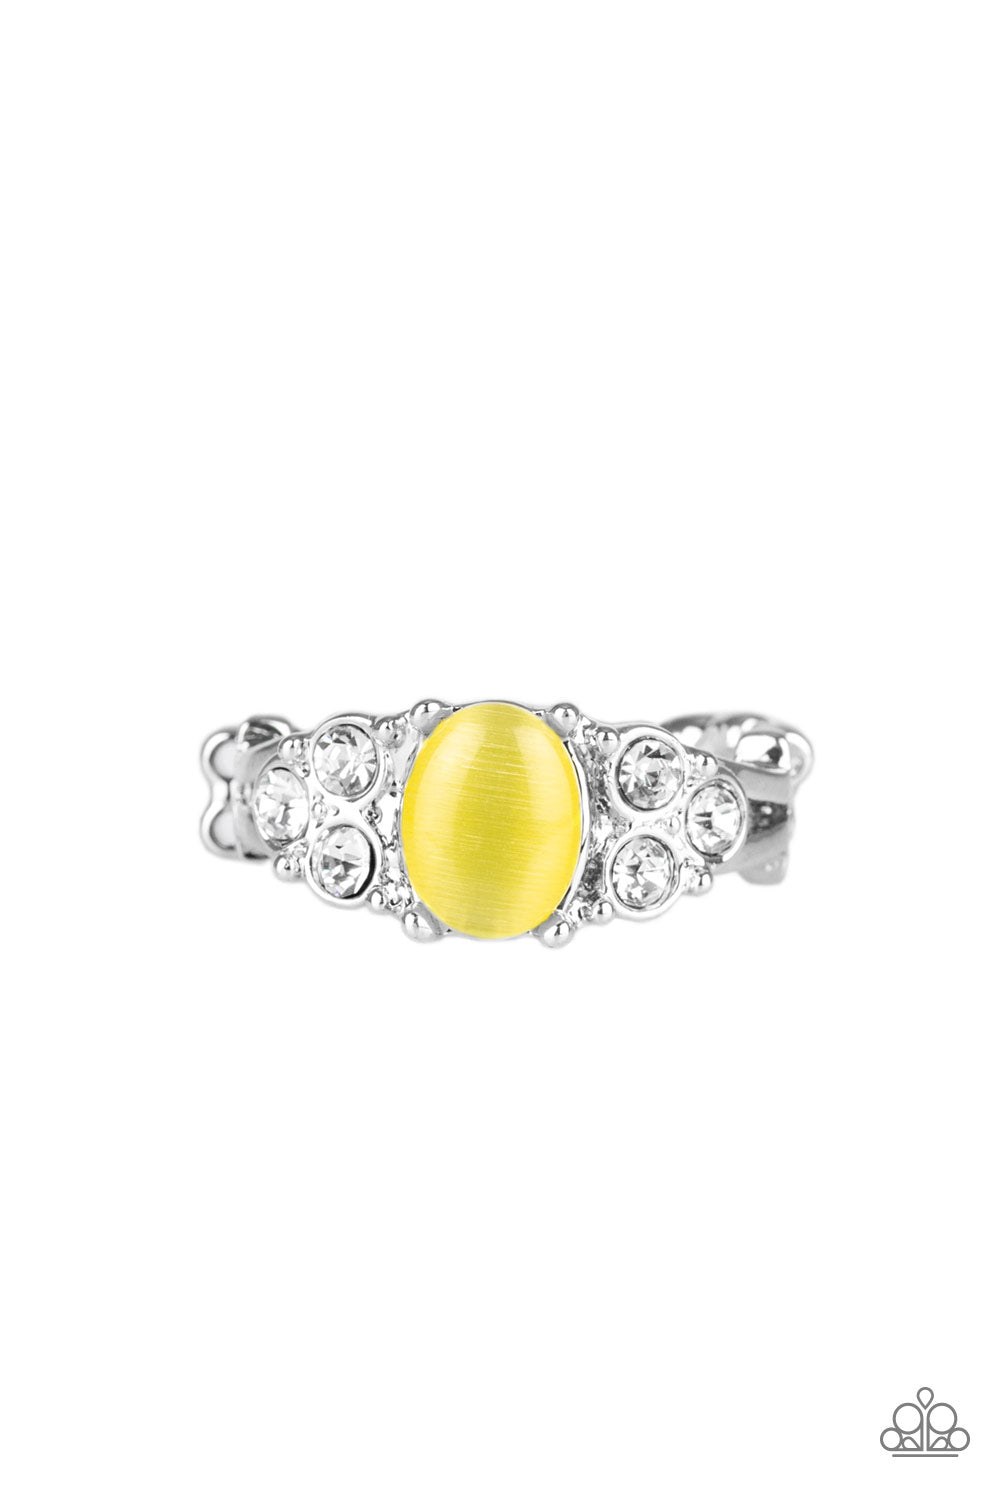 shop-sassy-affordable- extra-spark-tacular-yellow-paparazzi-accessories